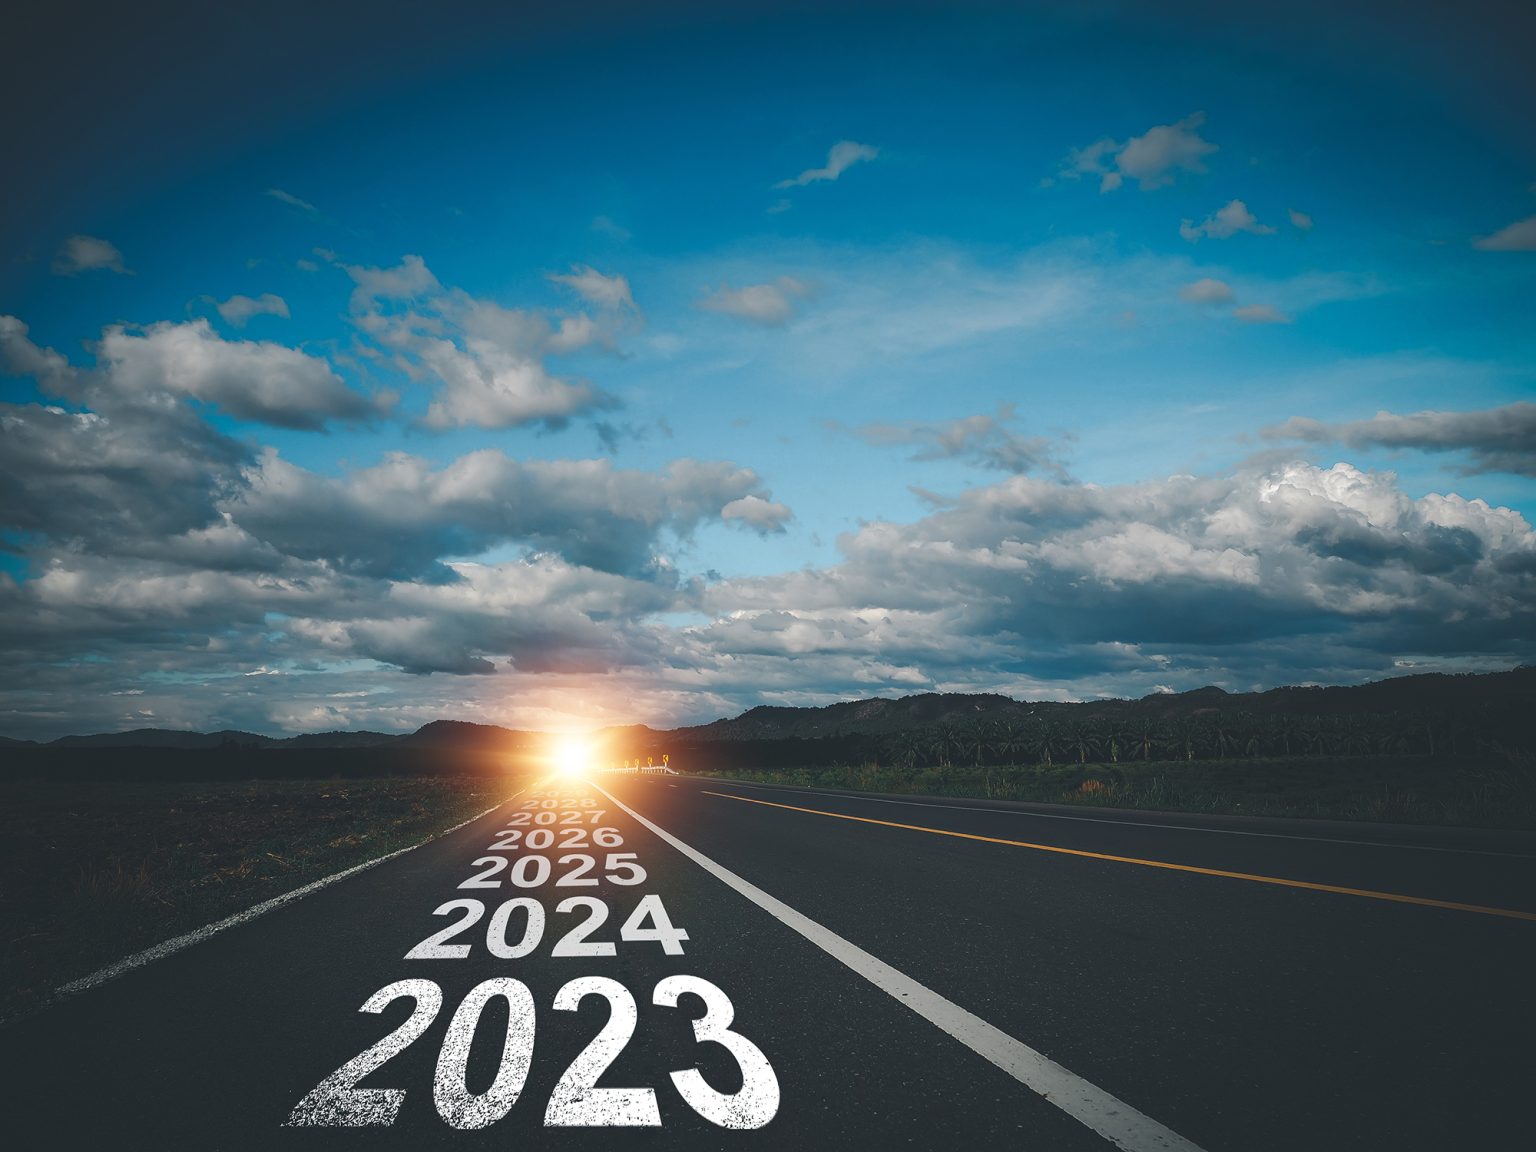 Road with written years going off into the horizon, beginning with 2023